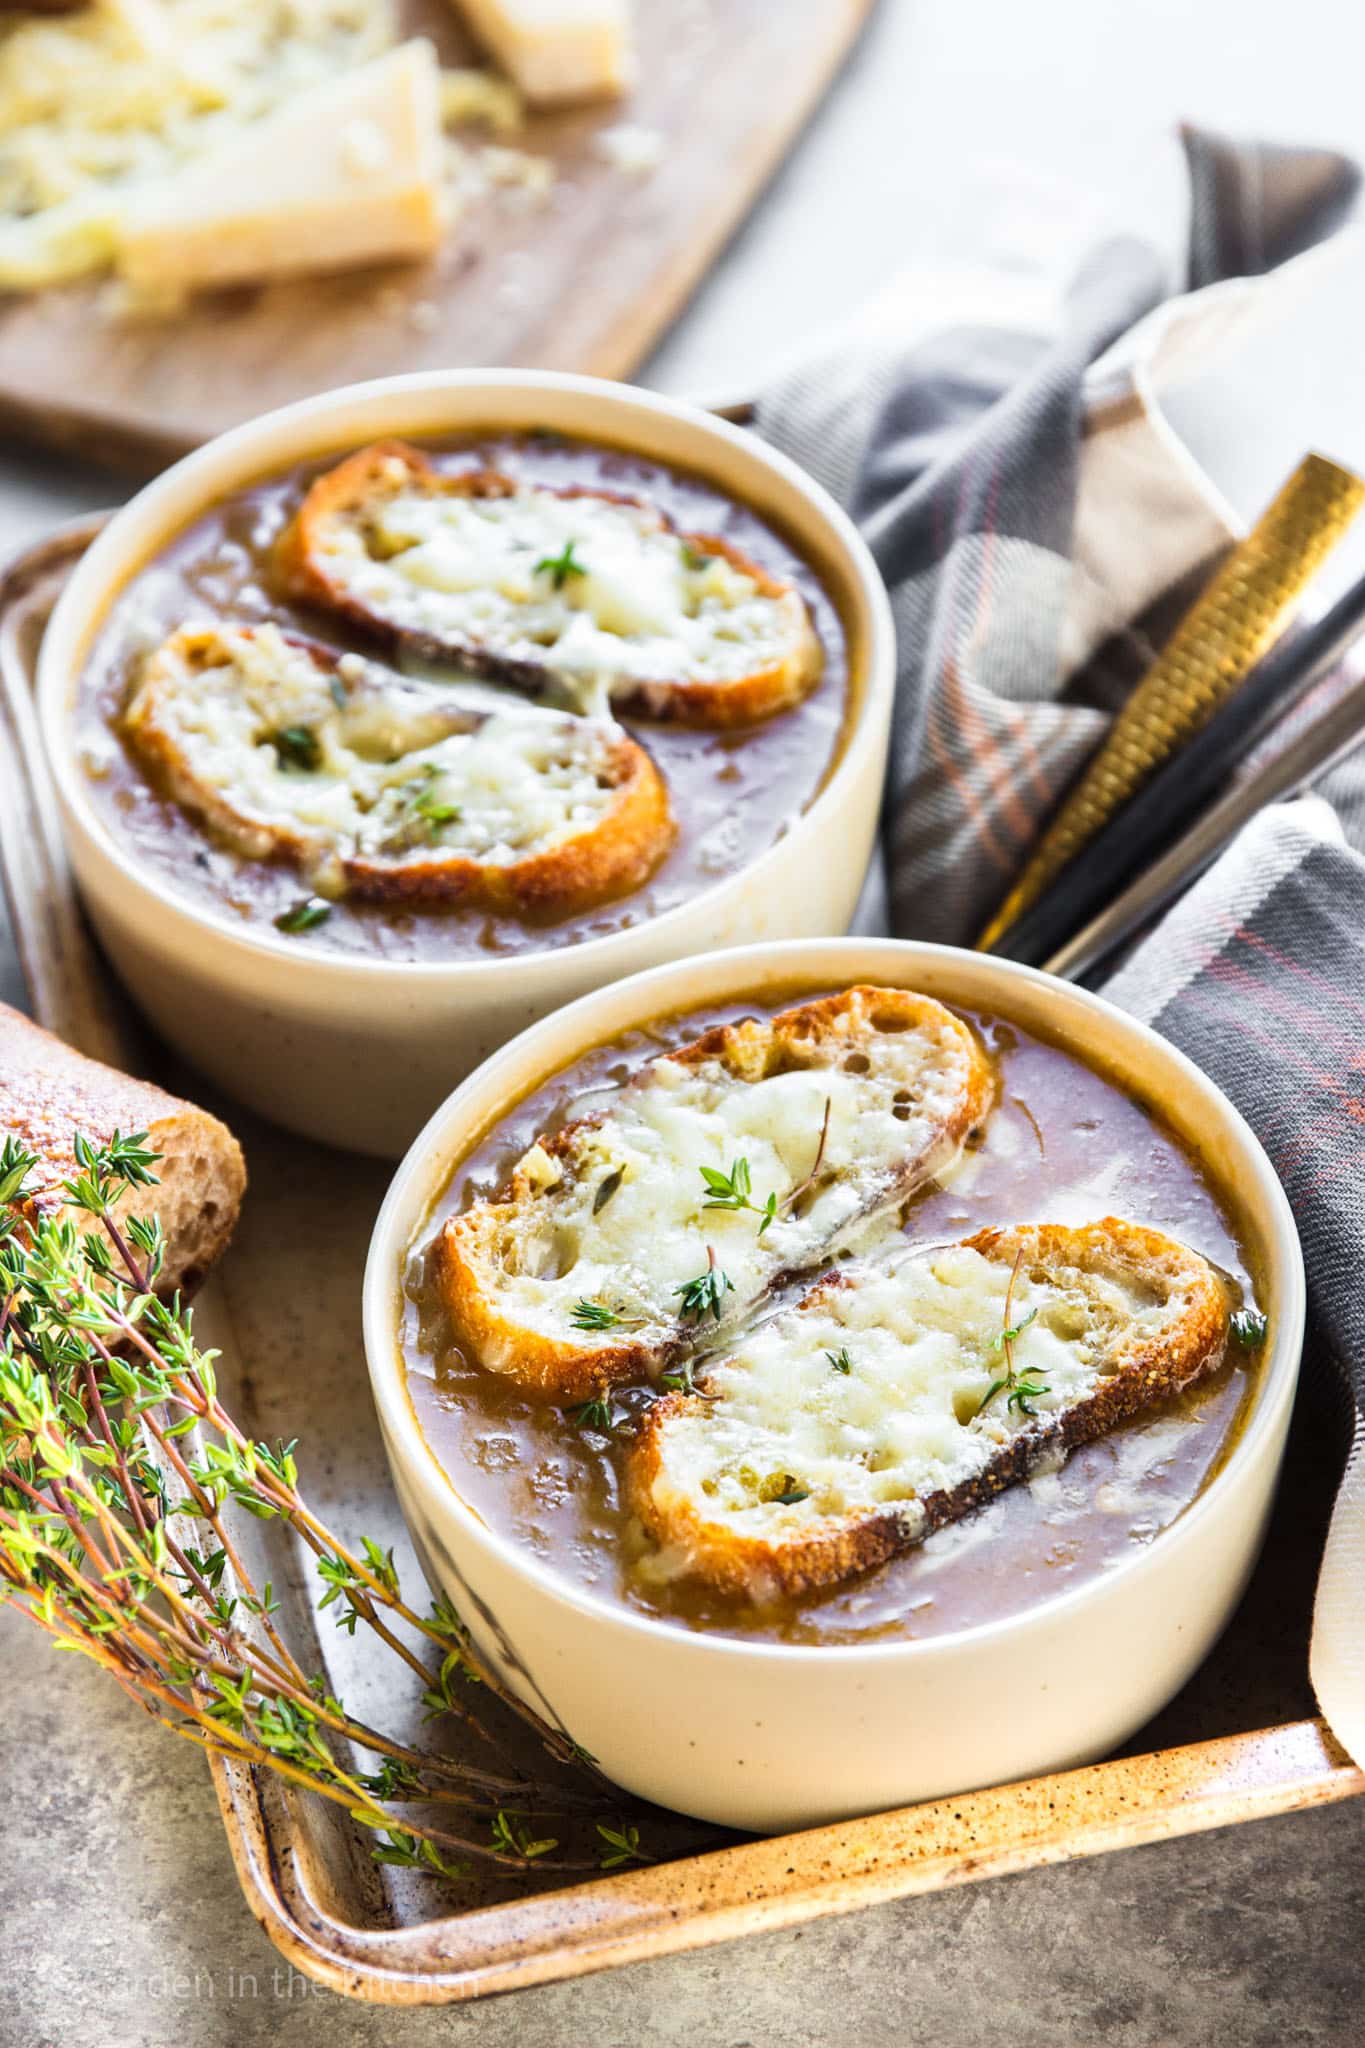 2 white bowls of french onion soup topped with toasted bread and melted cheese.